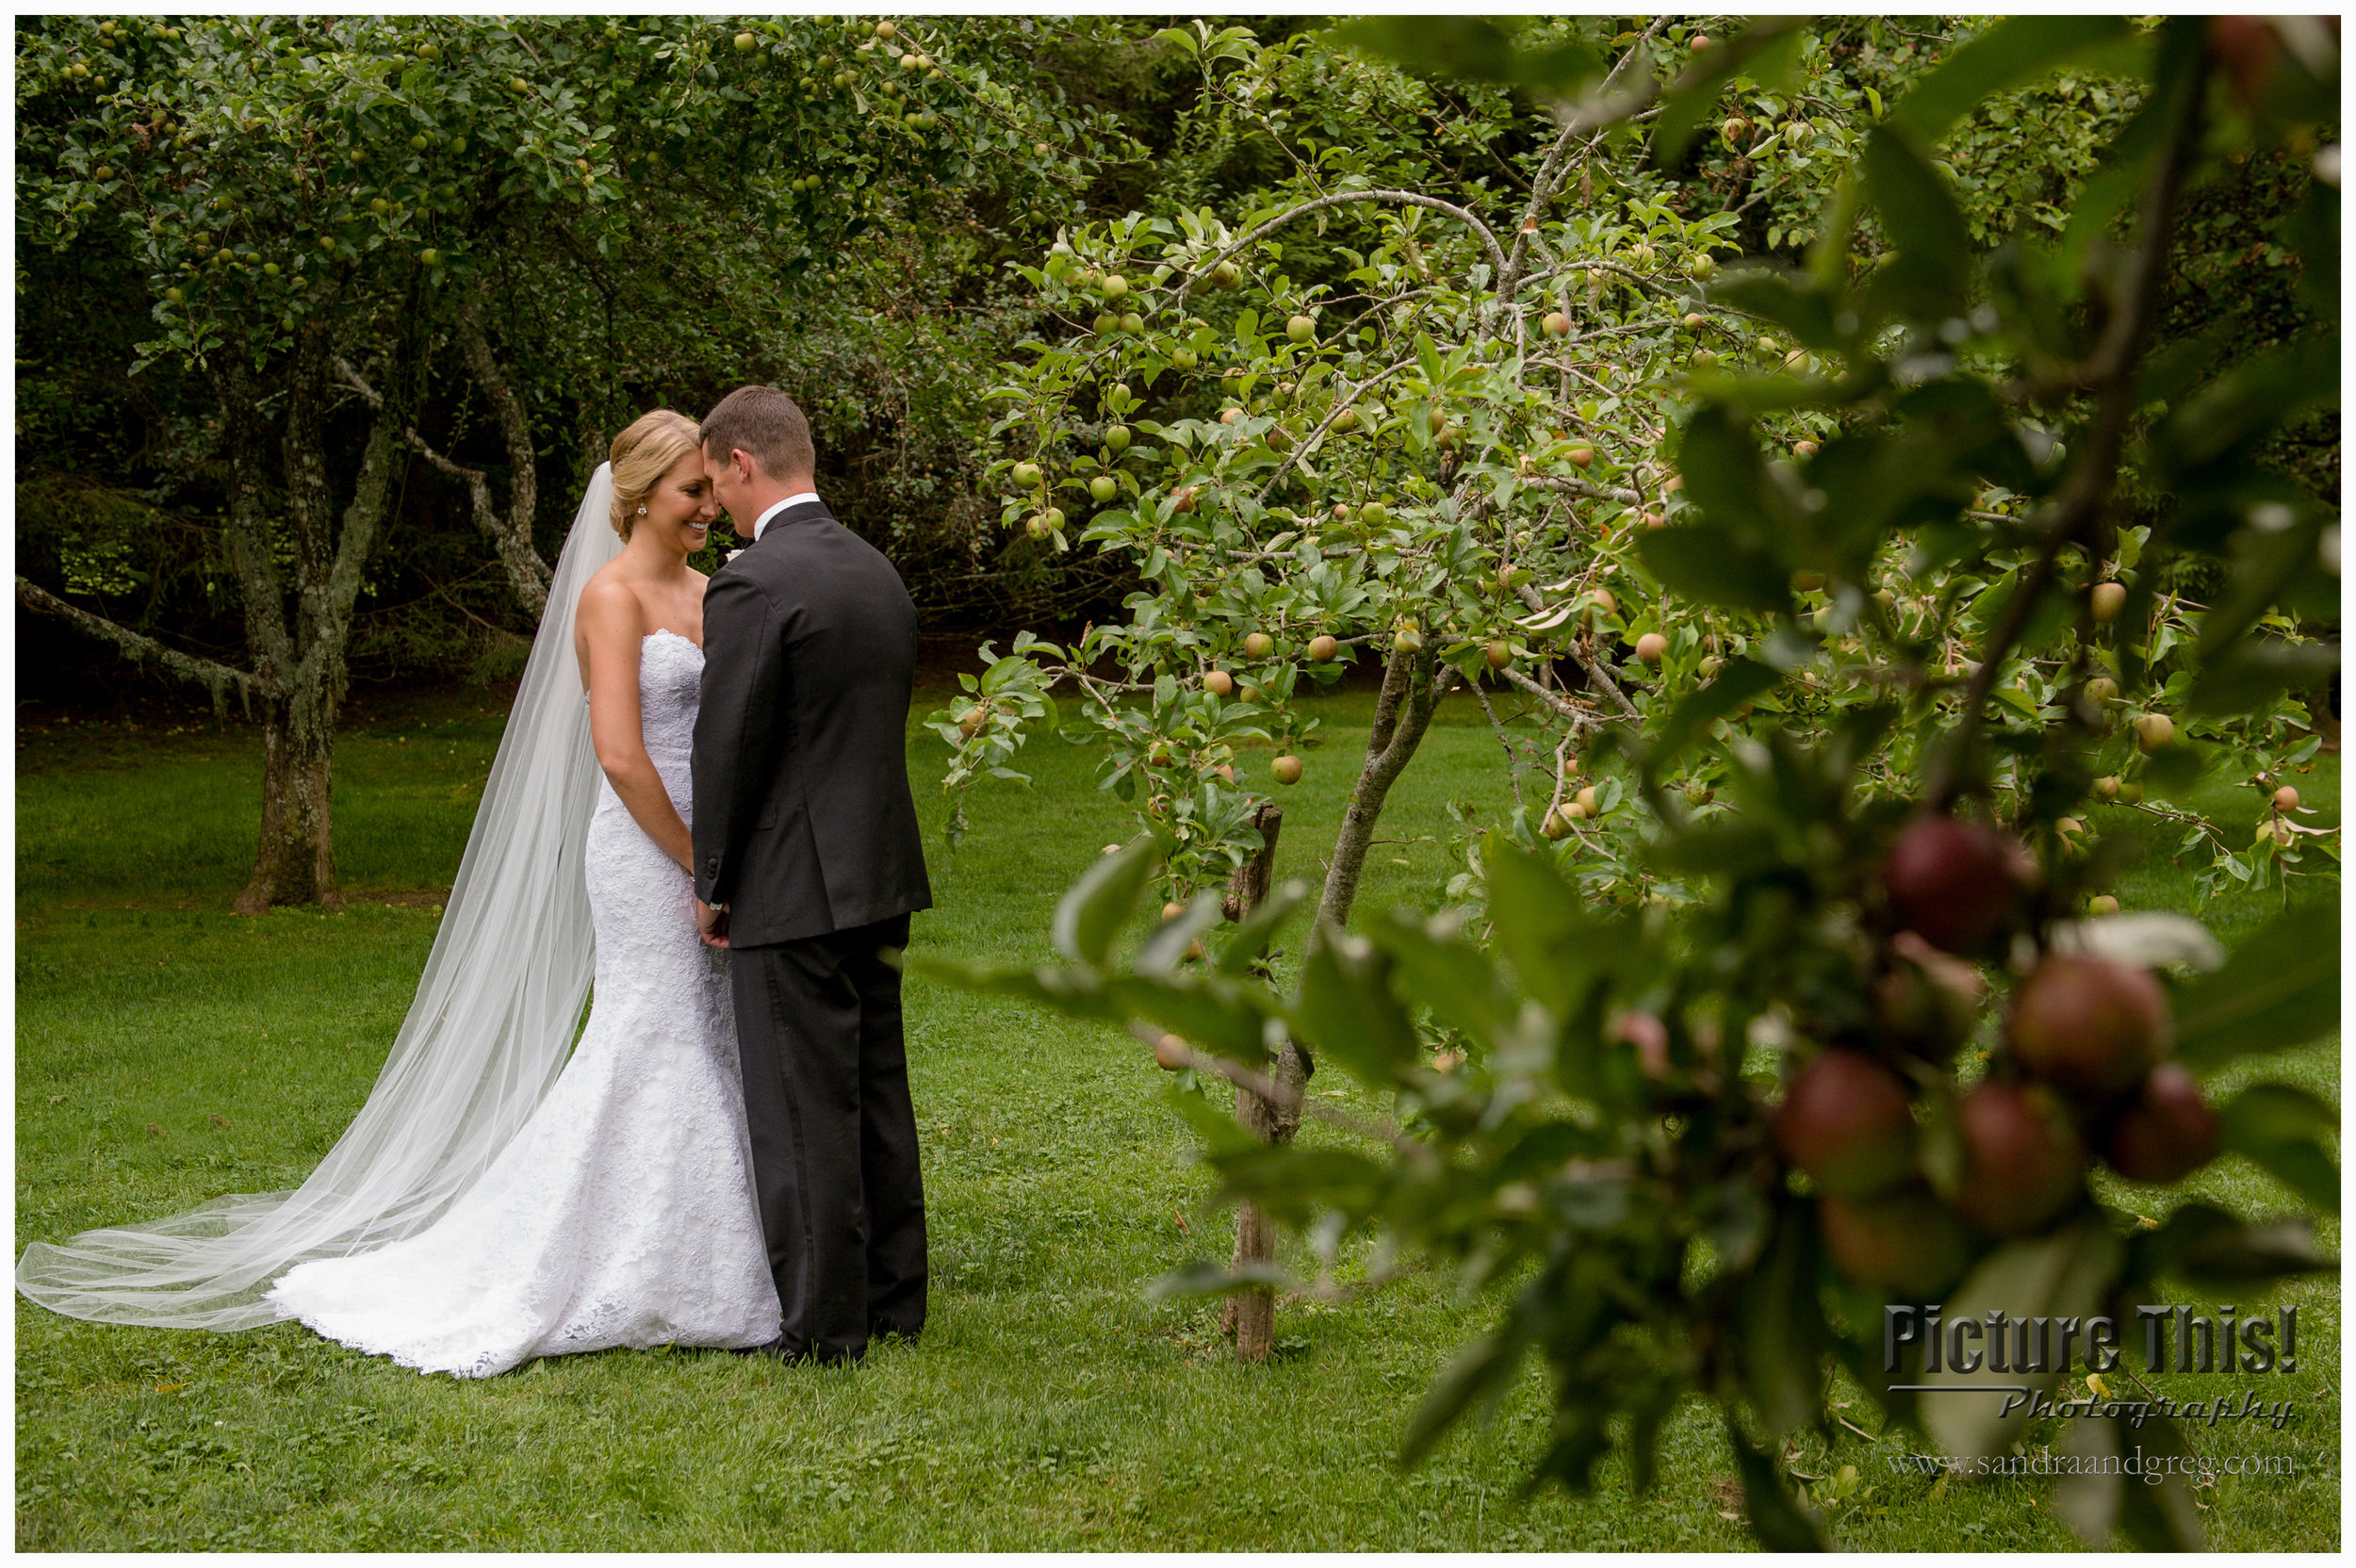 Chelsey & Tom at The Farm at Old Edwards Inn